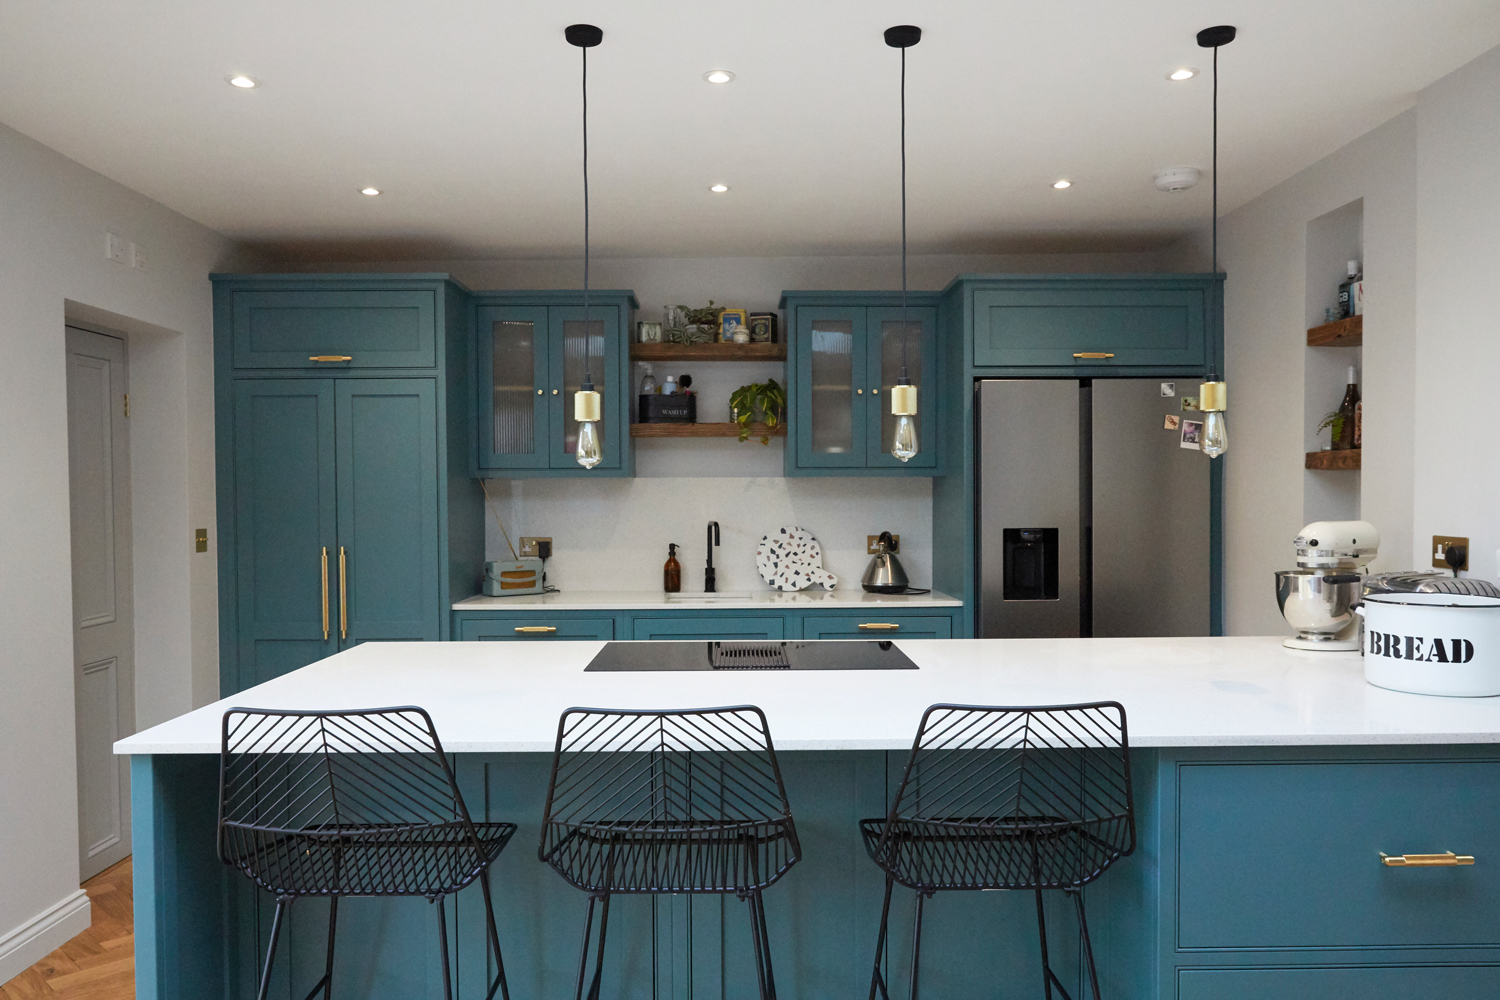 Bespoke kitchen peninsular with black metal barstools and buster + Punch brass bar handles